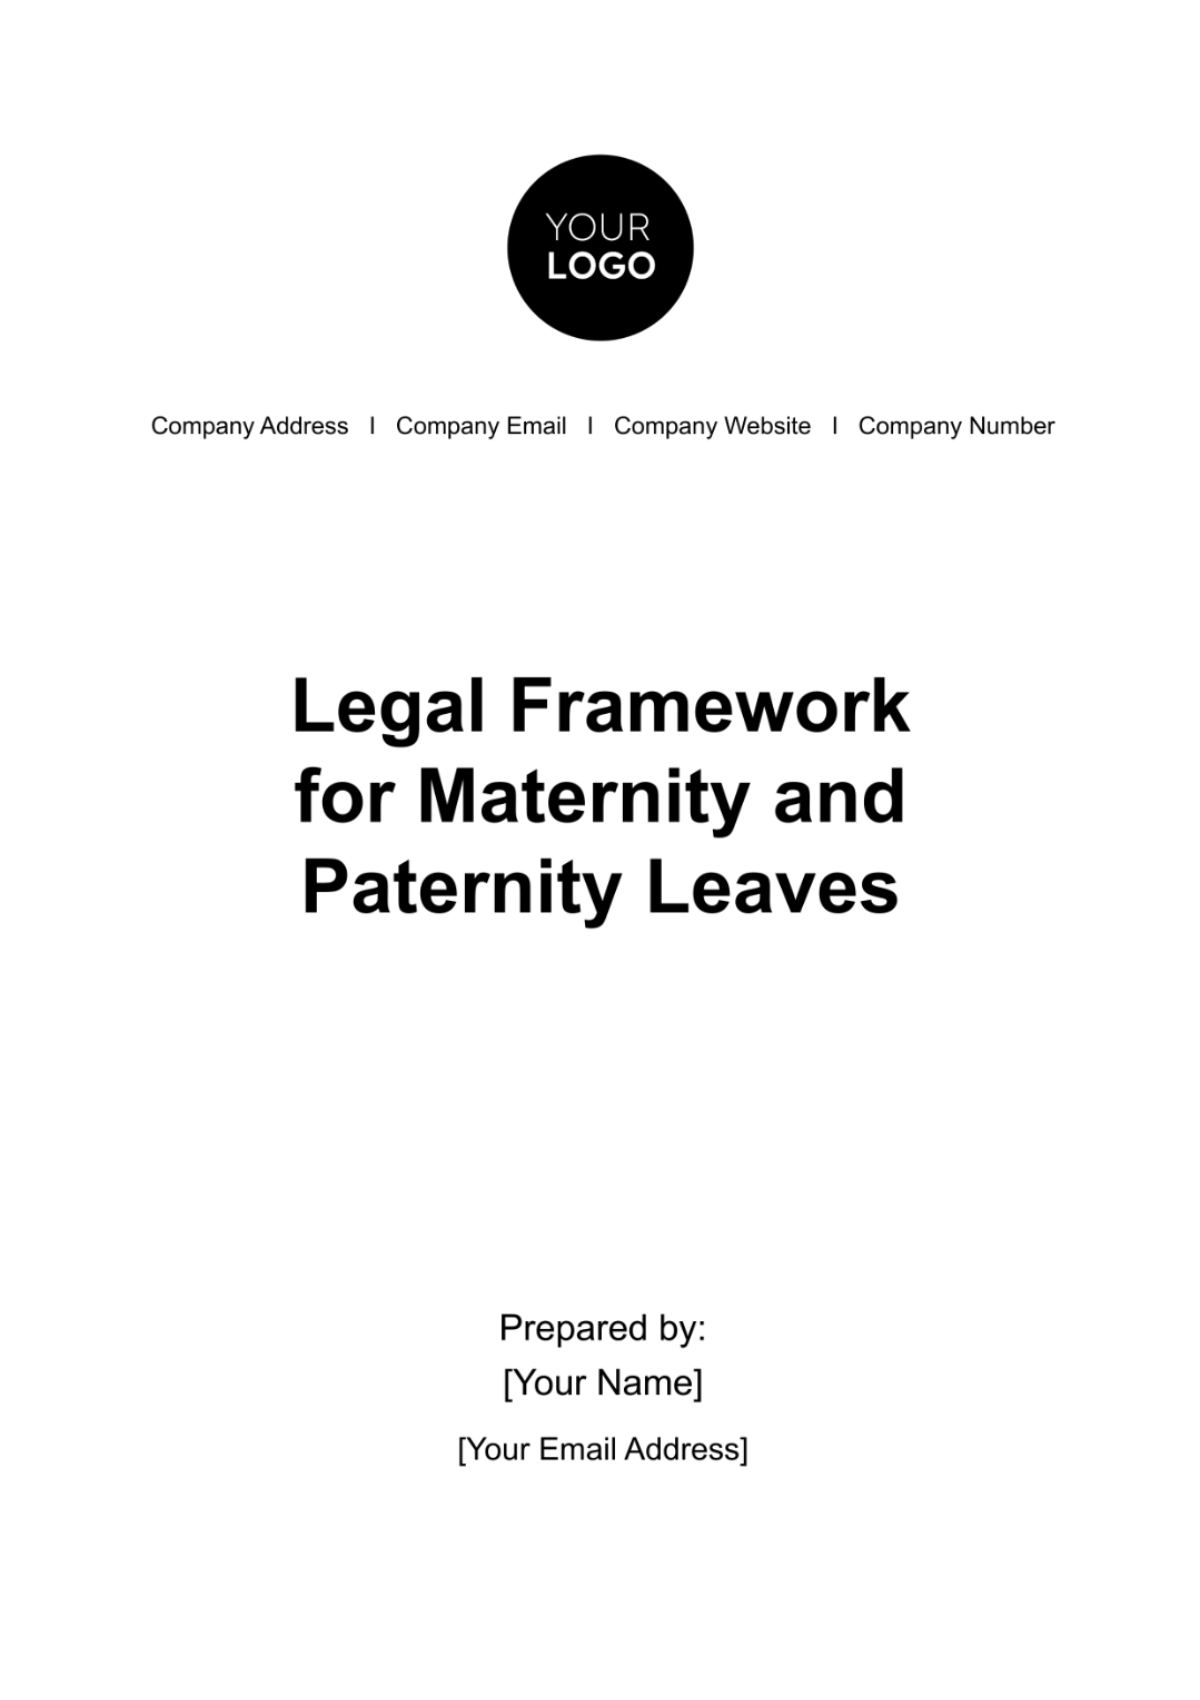 Legal Framework for Maternity and Paternity Leaves HR Template